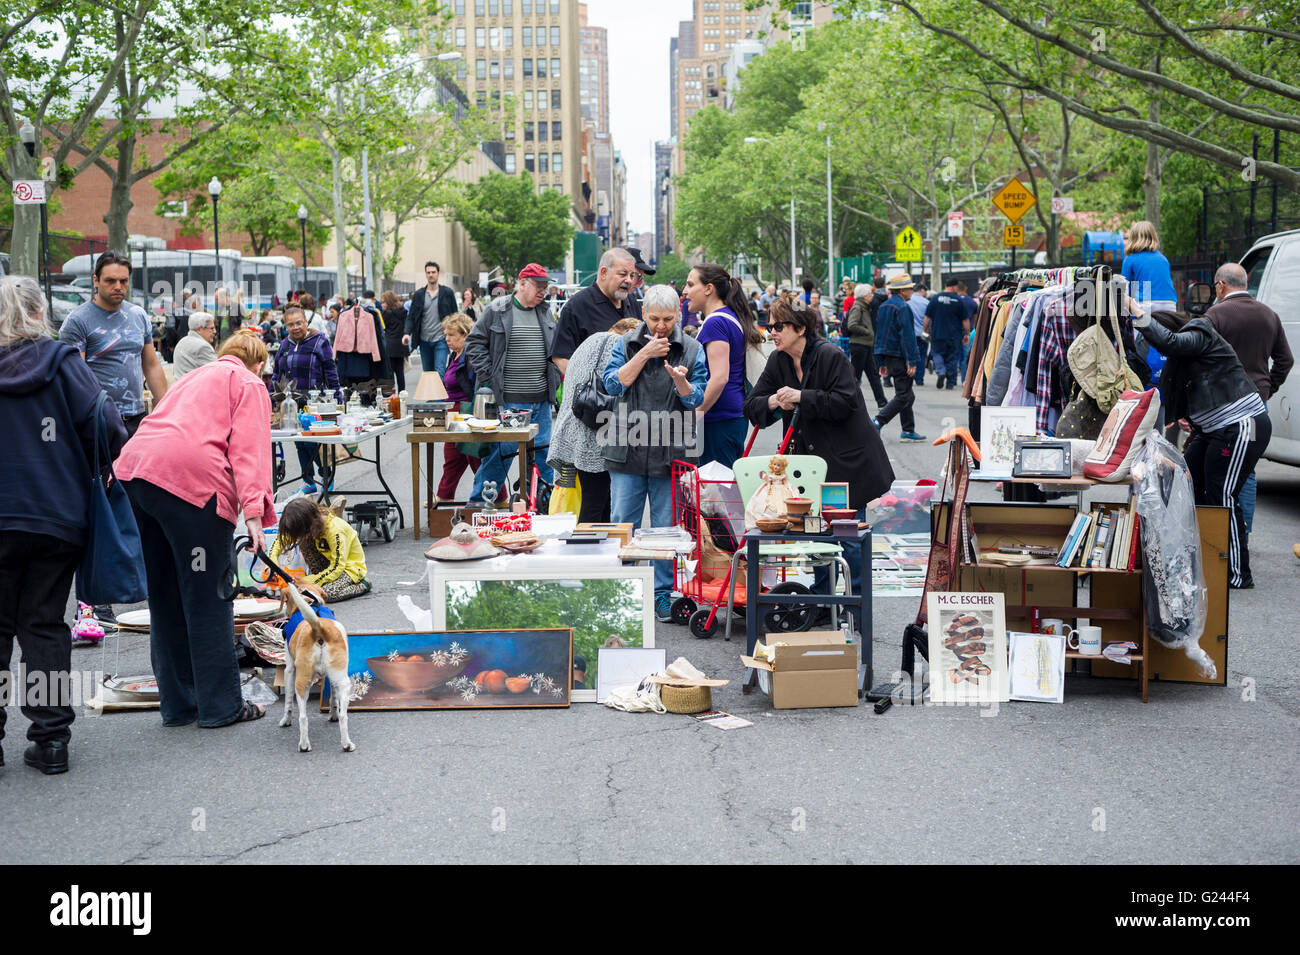 Shoppers search for bargains at the humongous Penn South Flea Market in the New York neighborhood of Chelsea on Saturday, May 21, 2016. The flea market appears like Brigadoon, only once every year, and the residents of the 20 building Penn South cooperatives have a closet cleaning extravaganza. Shoppers from around the city come to the flea market which attracts thousands passing through.  (© Richard B. Levine) Stock Photo